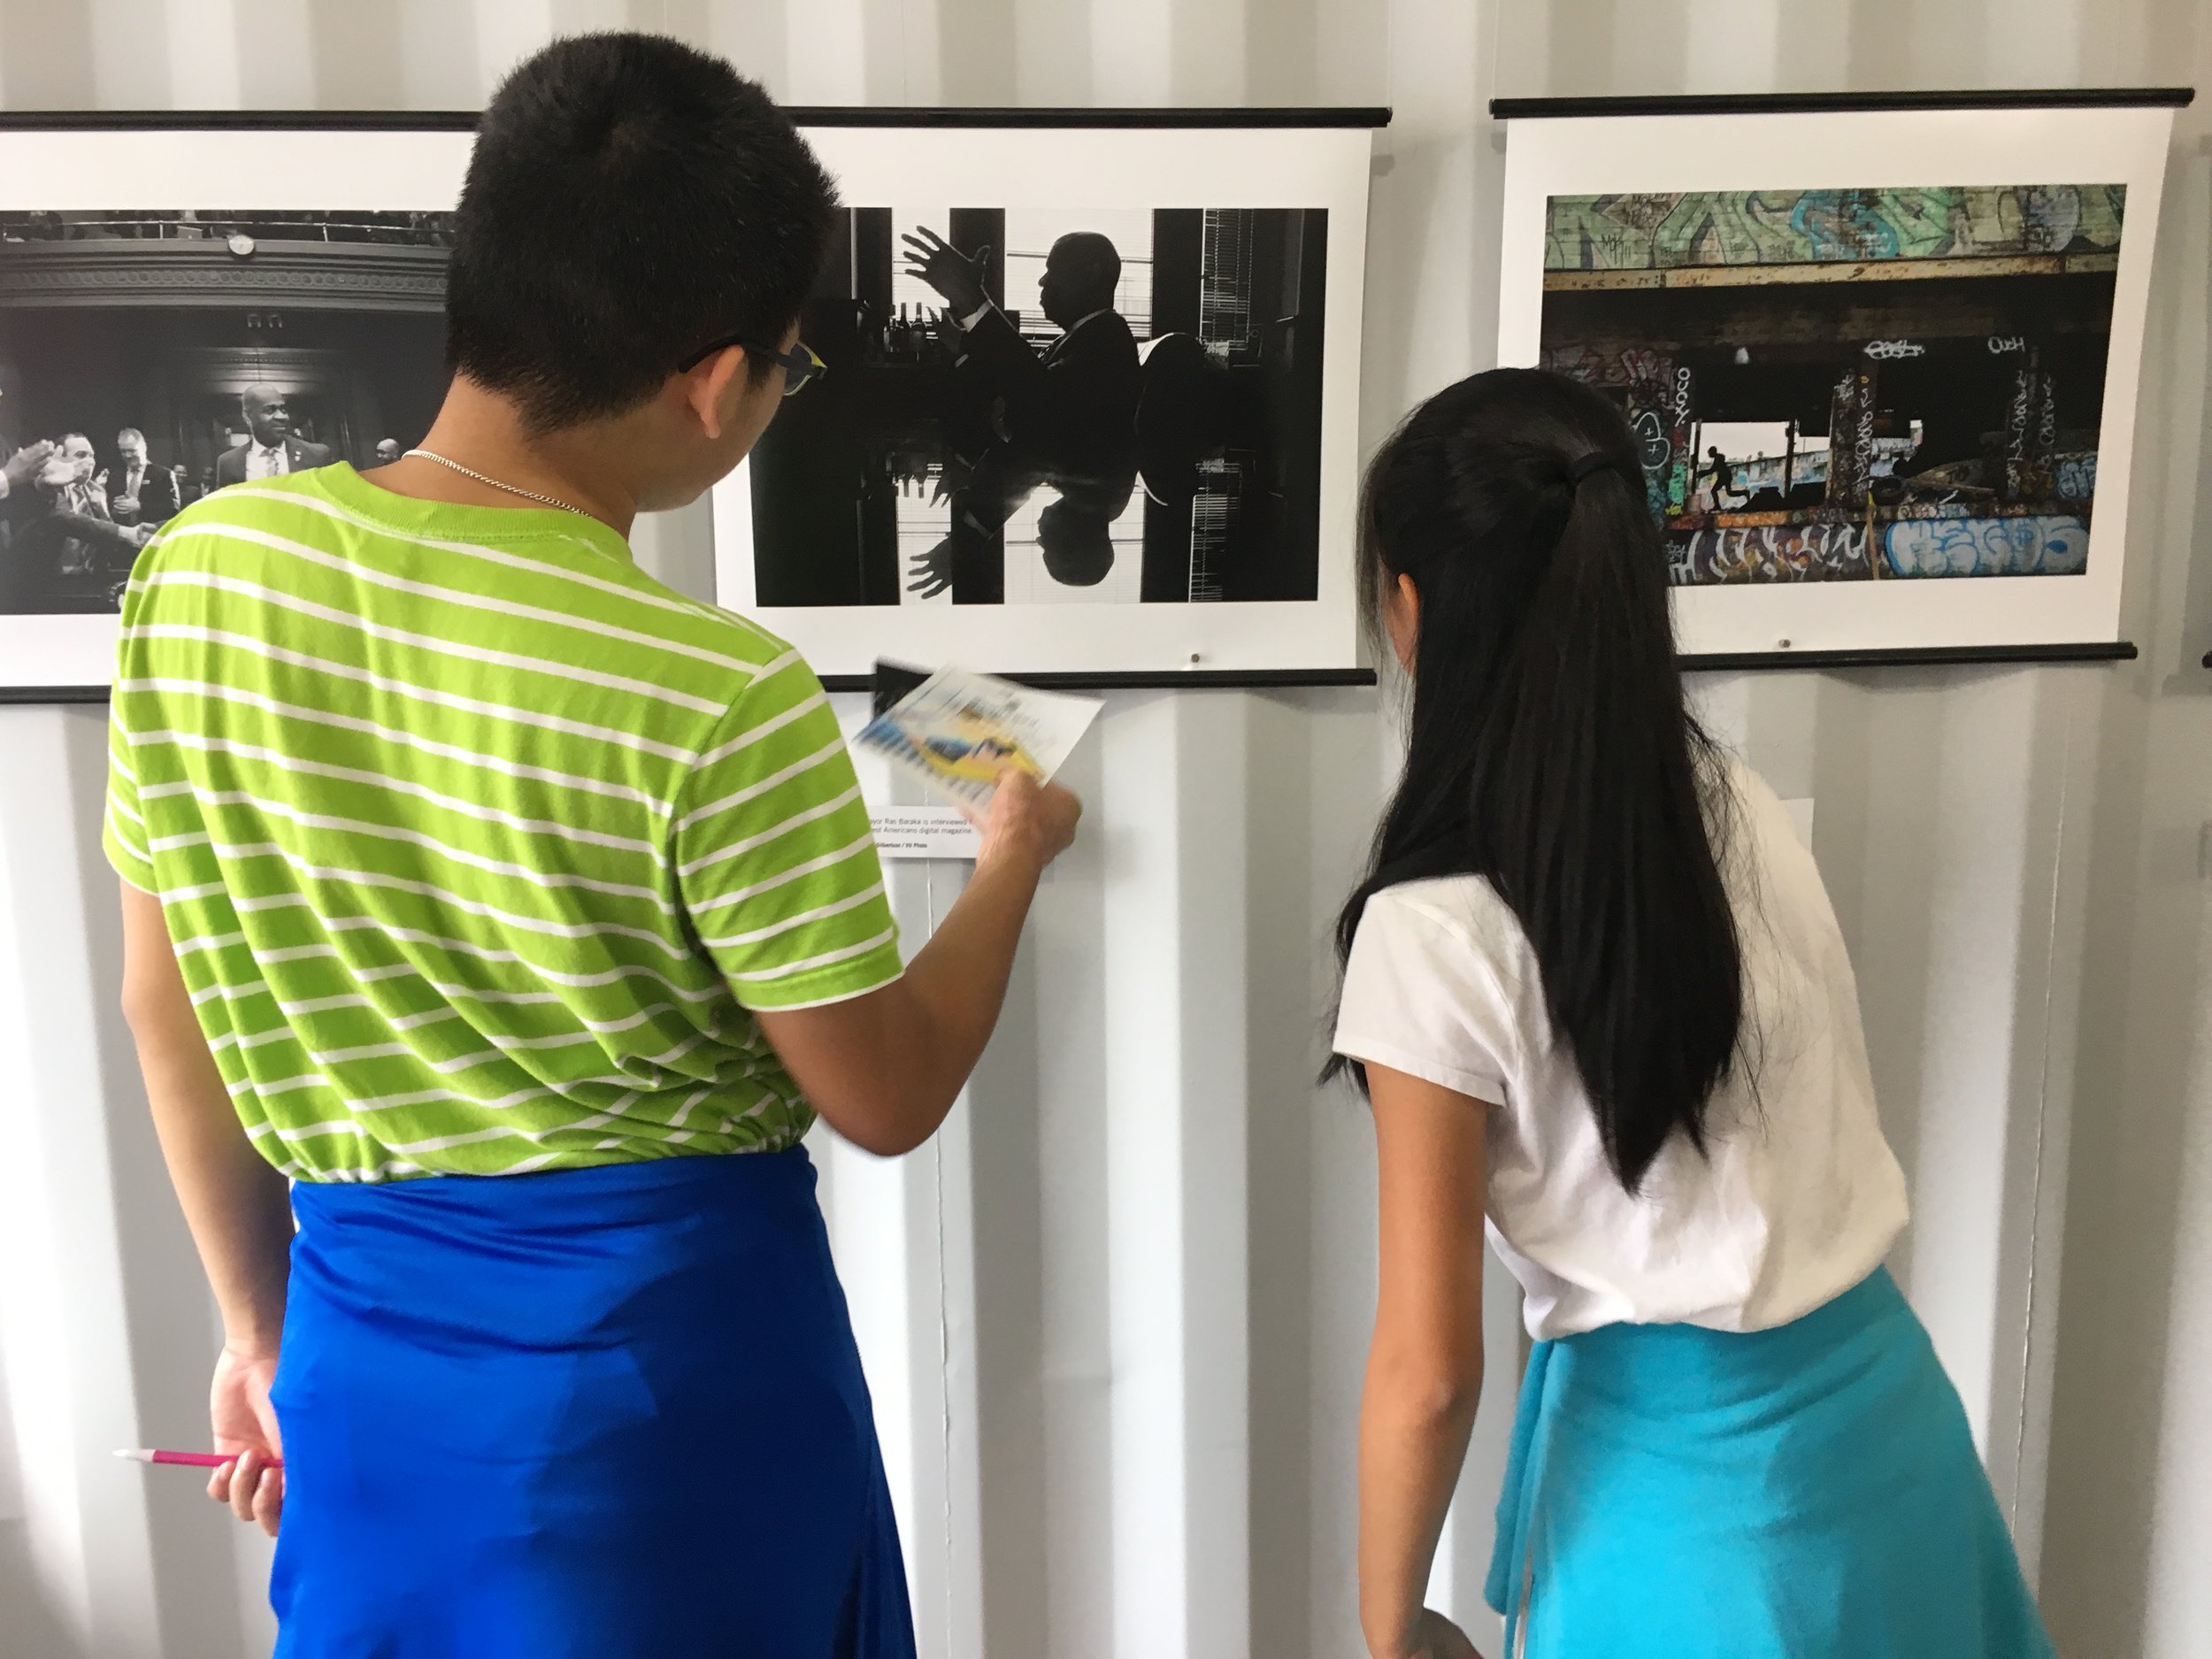  Students examine photos in the Newest Americans exhibit during Photoville's Education Day. Over 500 middle and high school students visited the photo village for an inside look at the exhibitions, artists and curators.&nbsp;(Photo by Julie Winokur) 